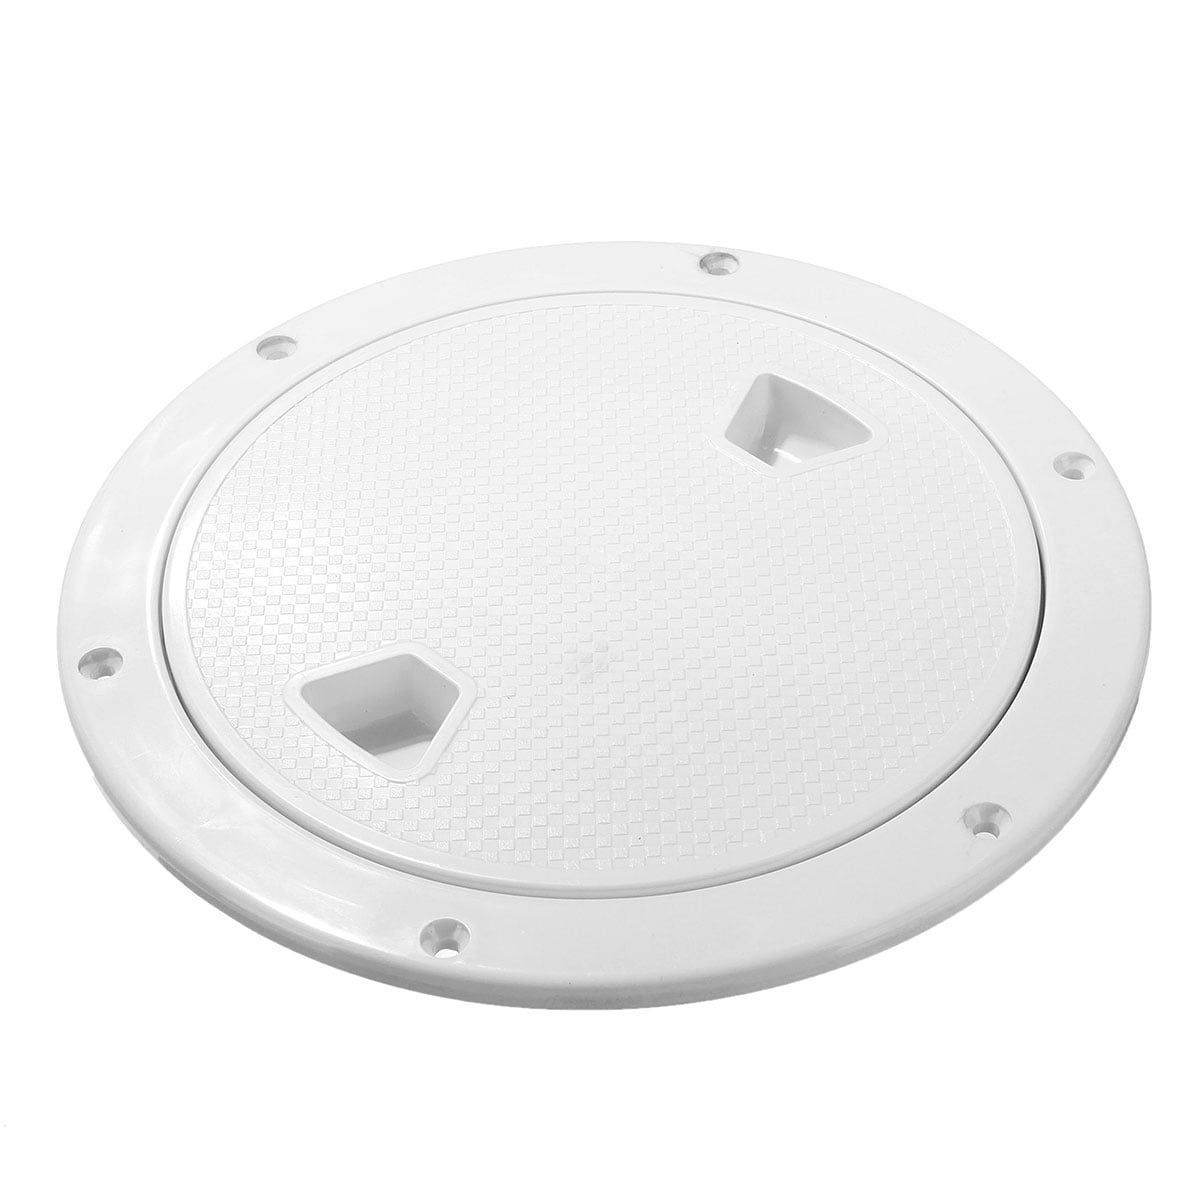 Hatch Cover,4/6/8 Inch Round Hatch Cover Non-Slip Deck Plate for Marine Boat Kayak Canoe 